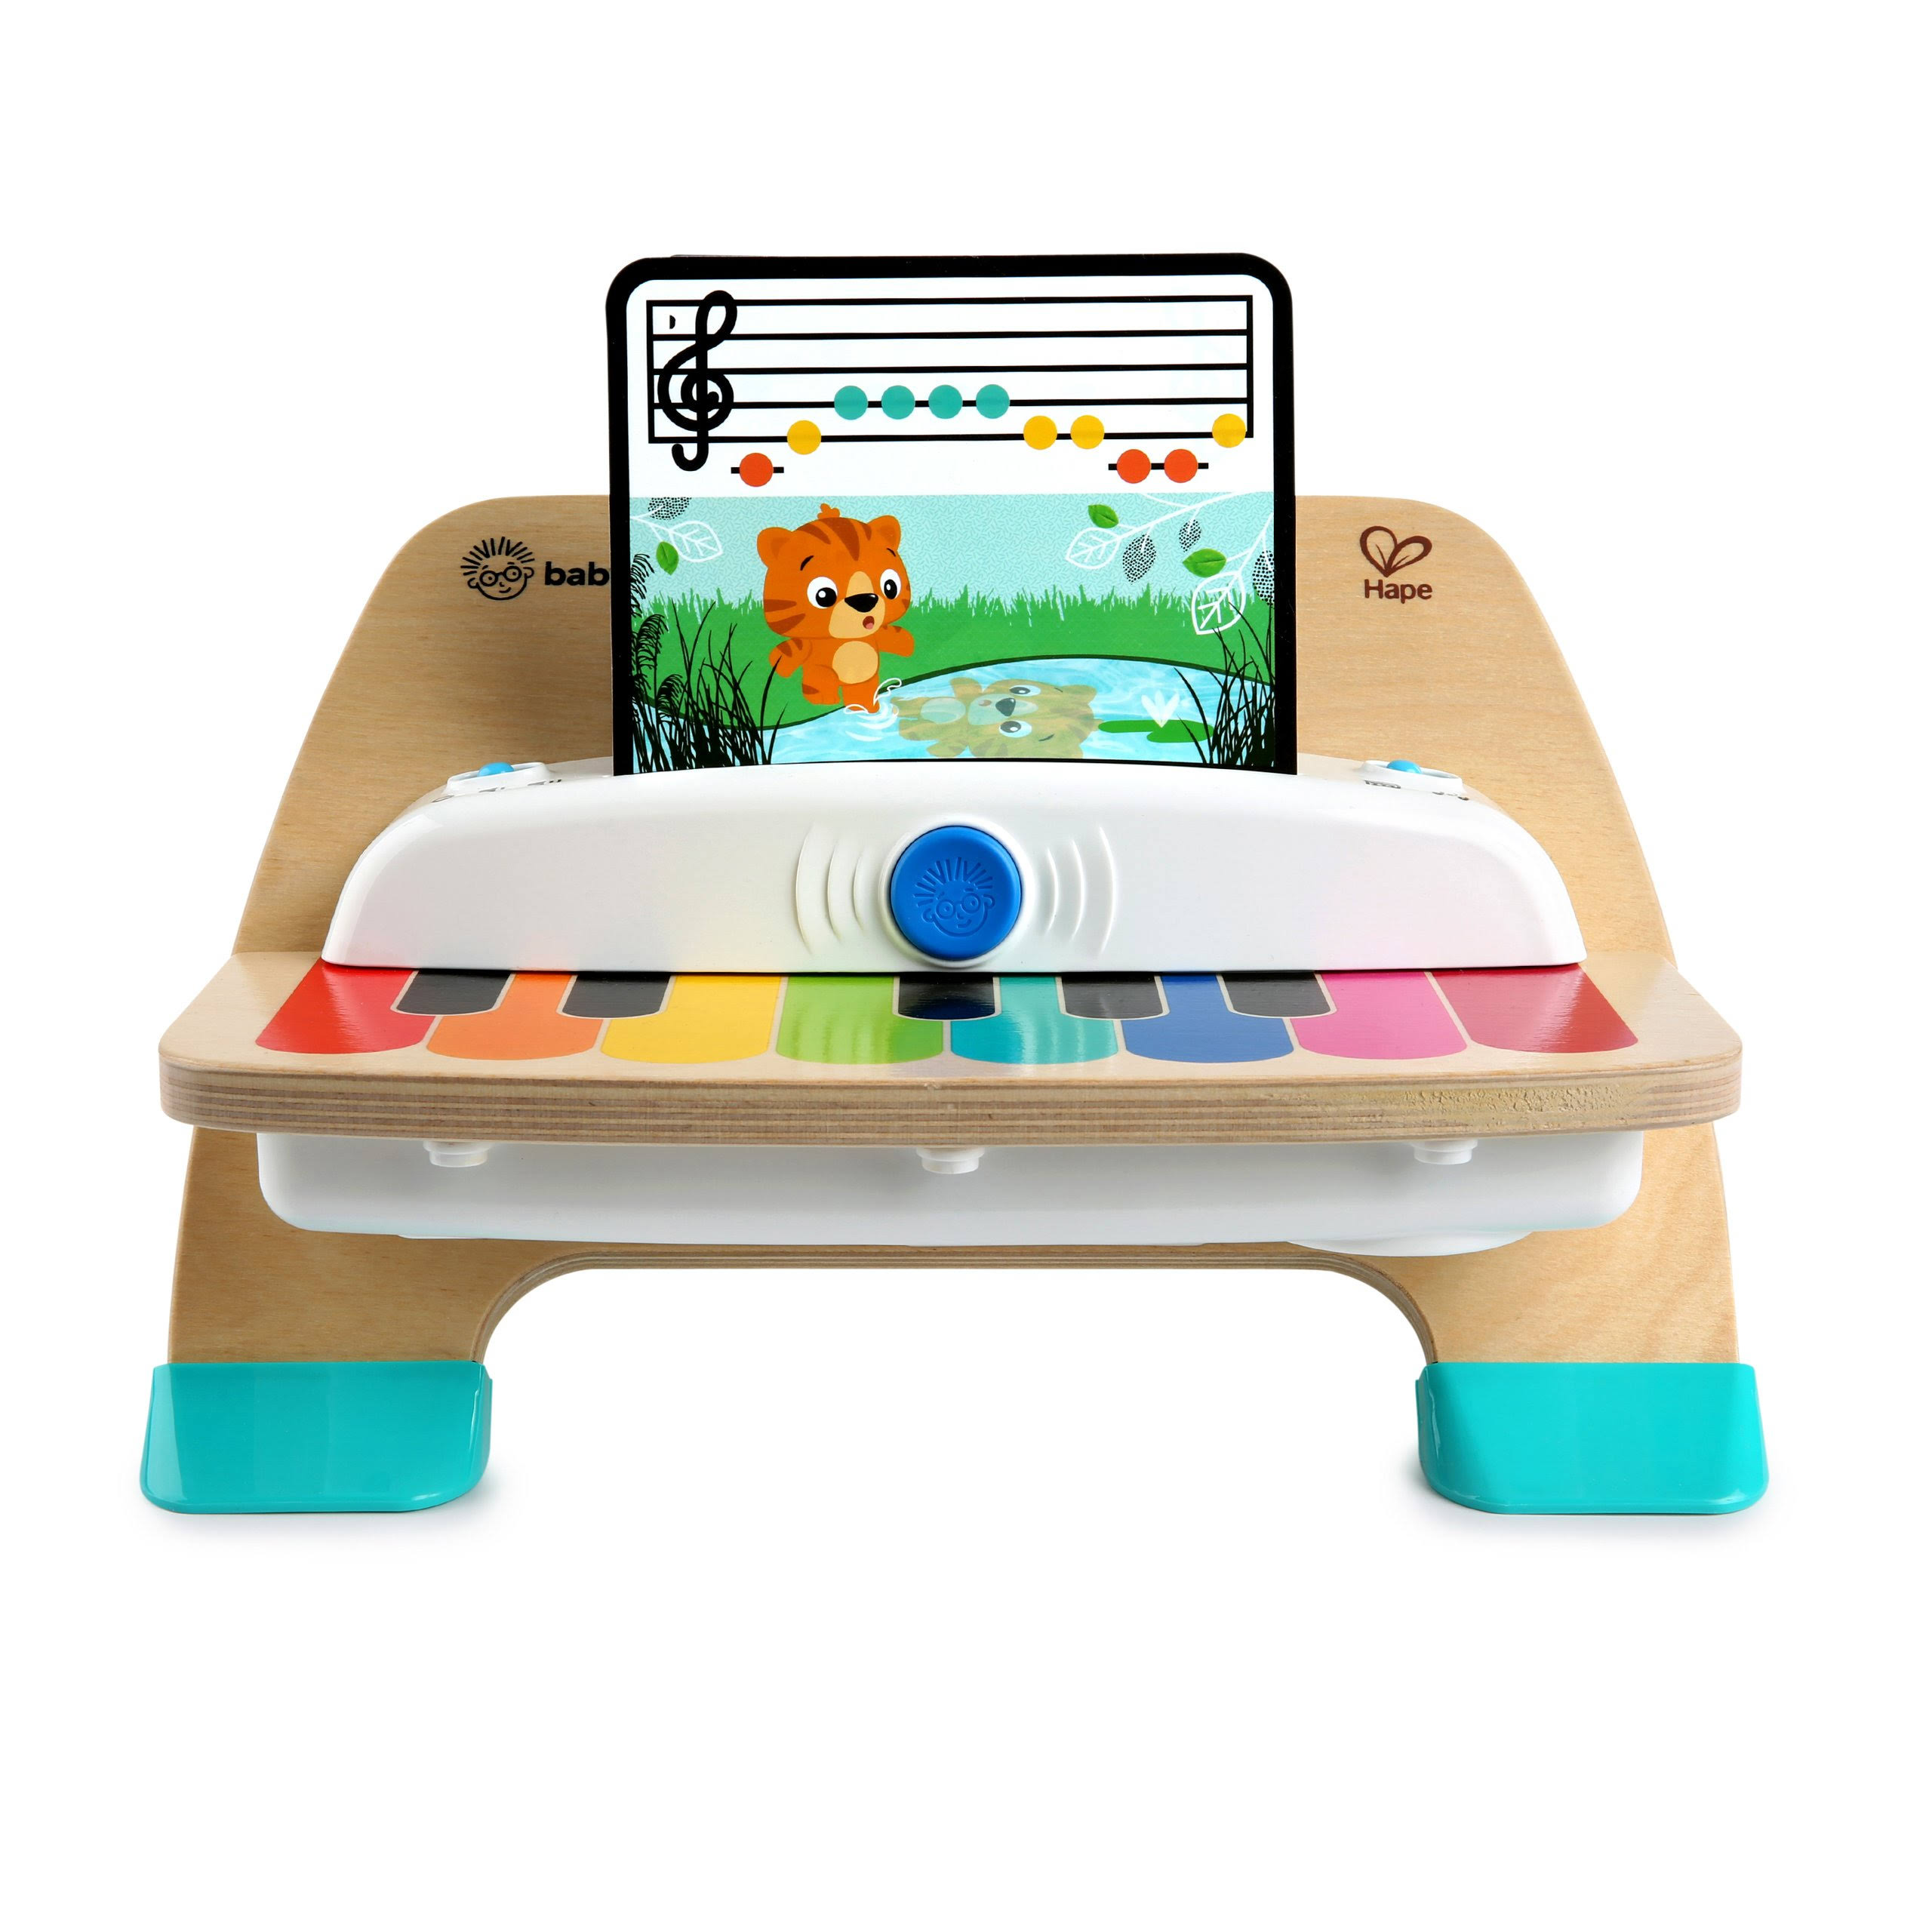 Hape Magic Touch Deluxe Piano Kids